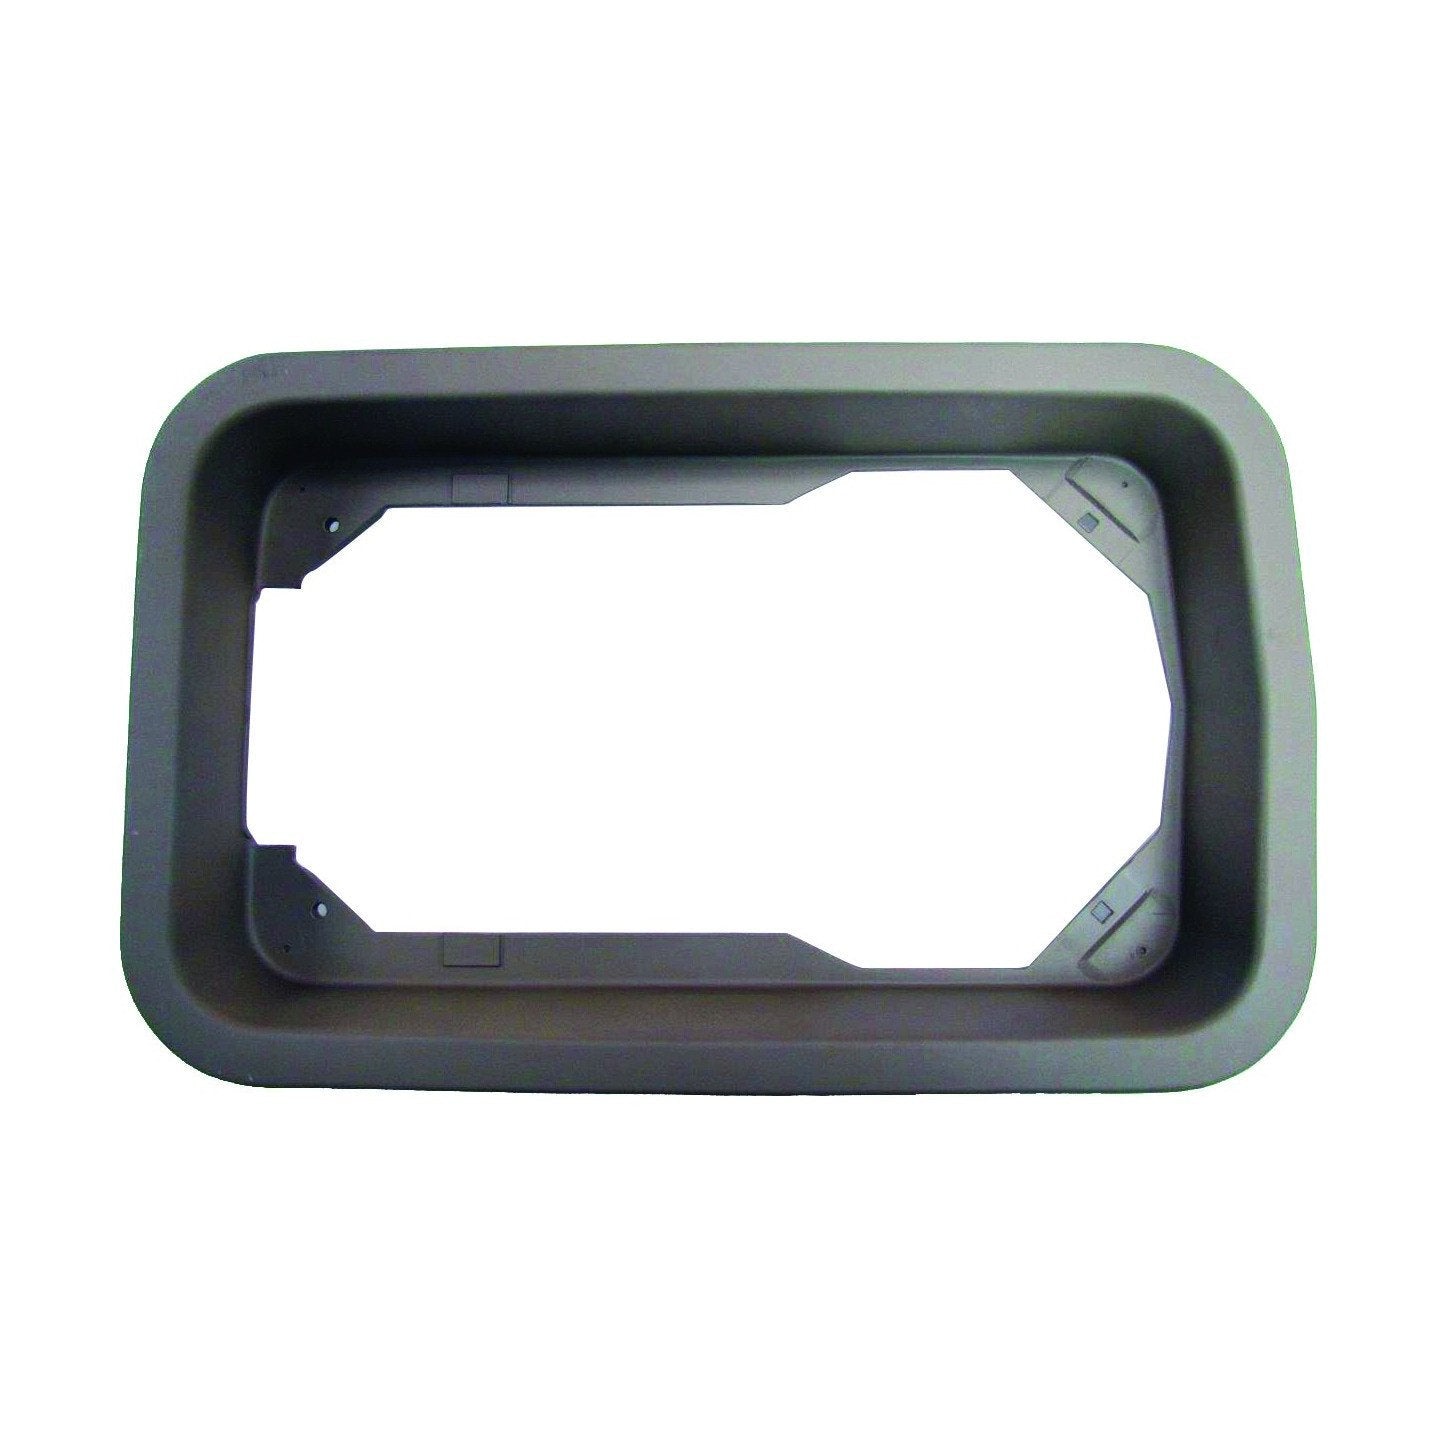 Headlight Moulding Panel For Classic Mack R Series - Suitable For Both Sides